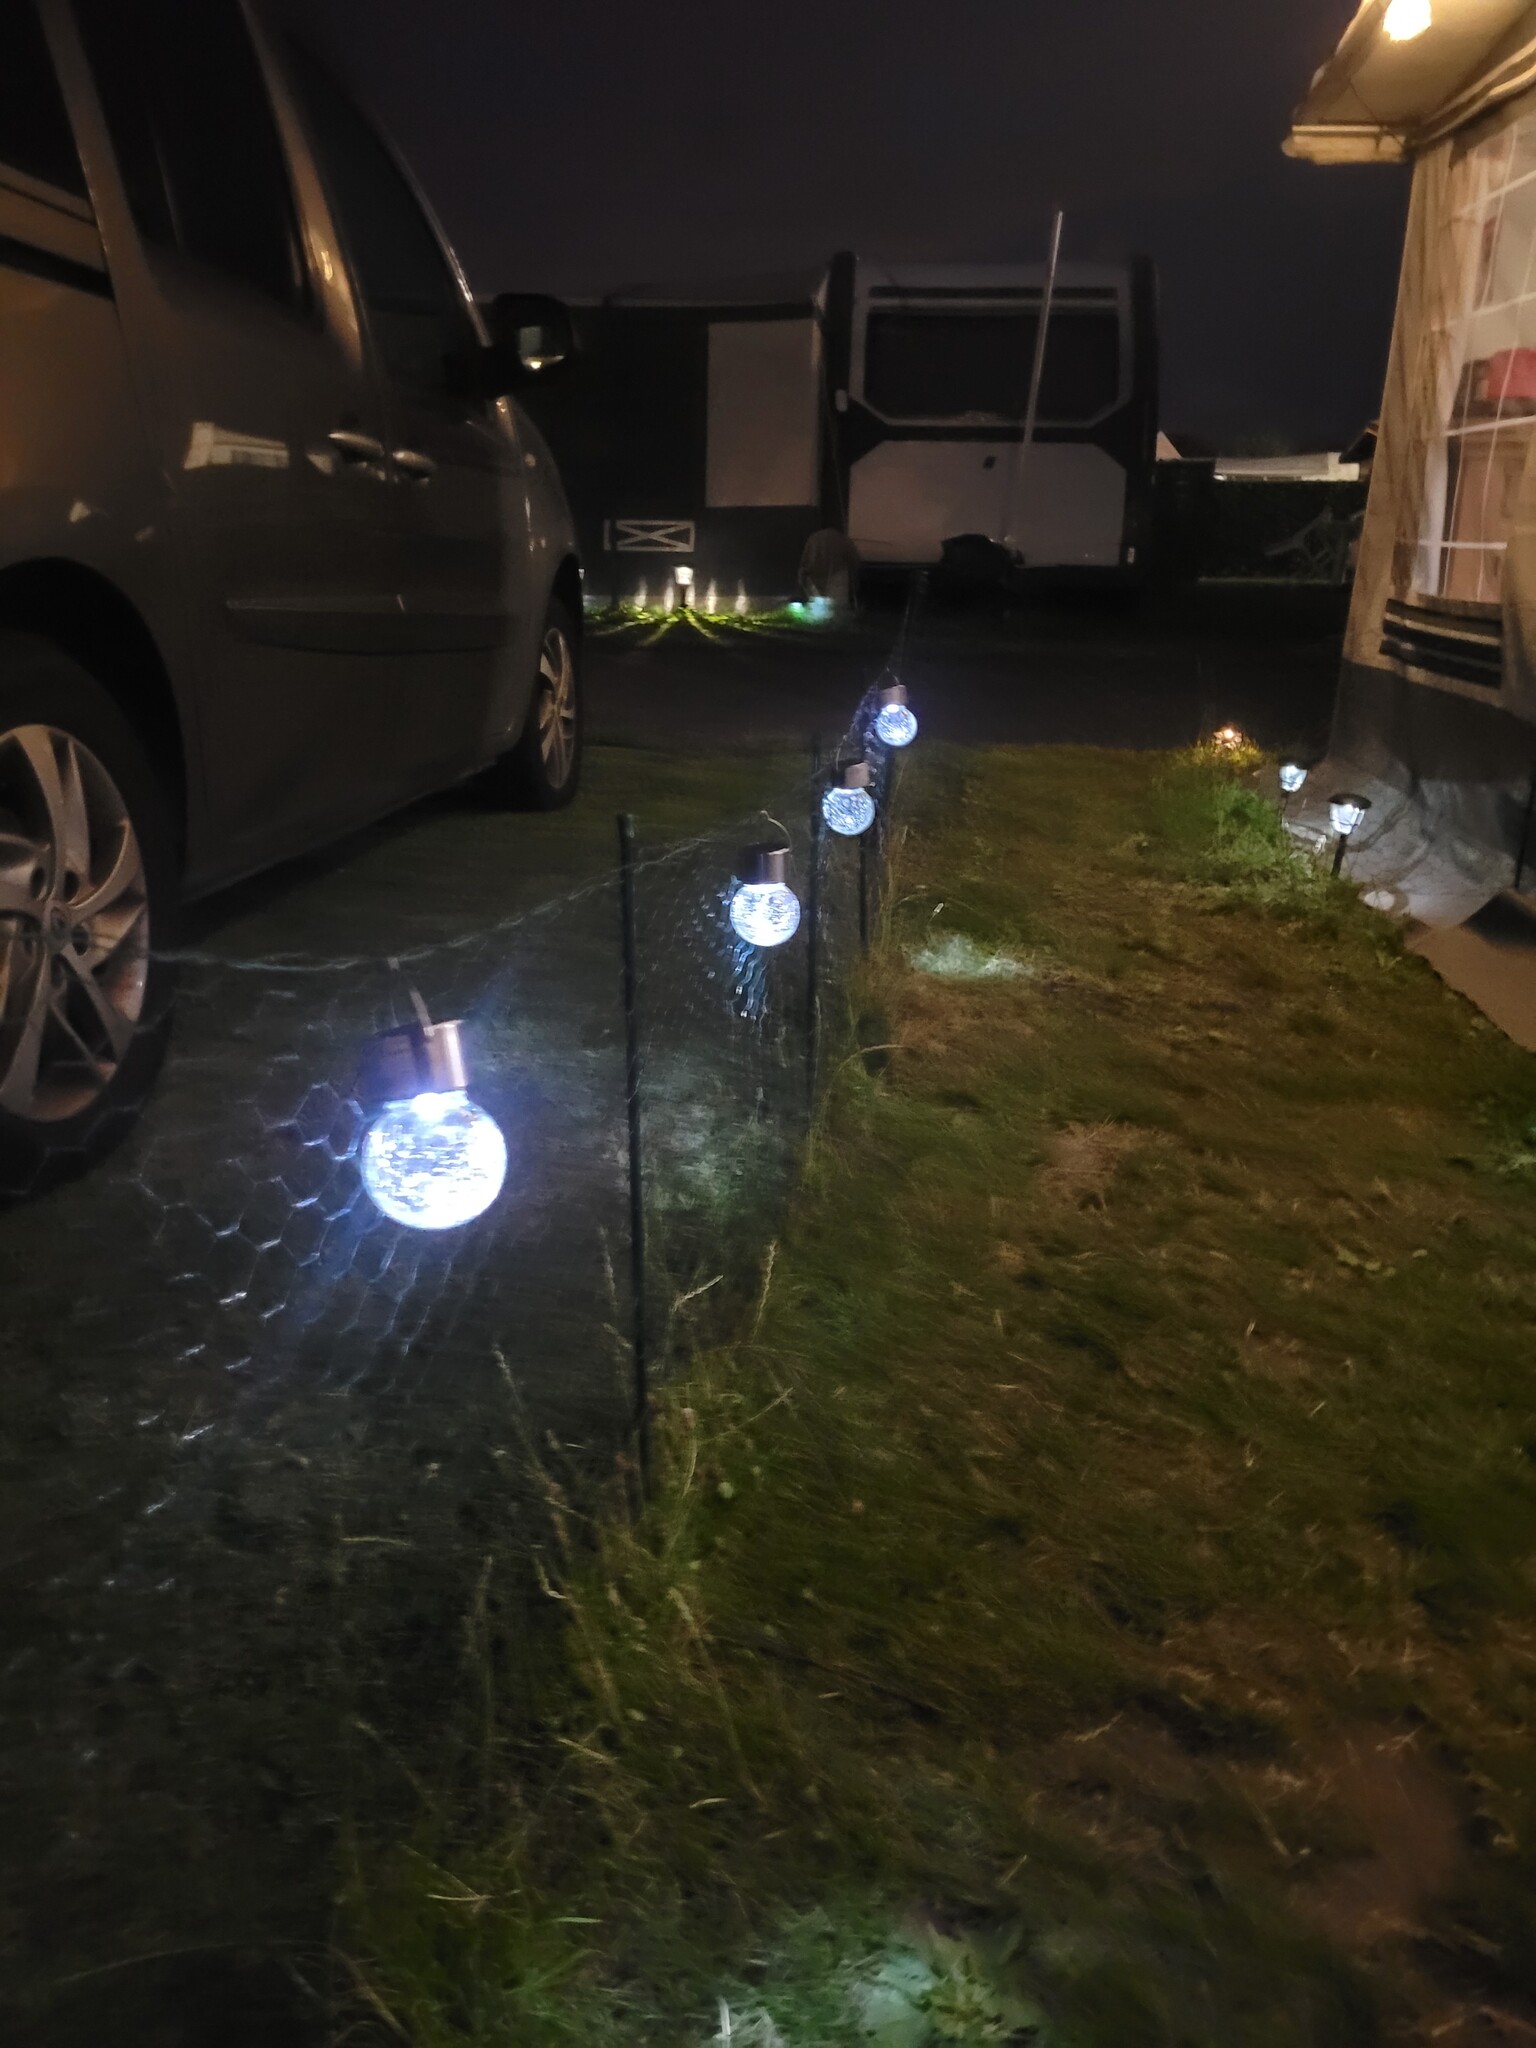 Aigostar LED Solar Ambient Lighting for Lawn 6500K